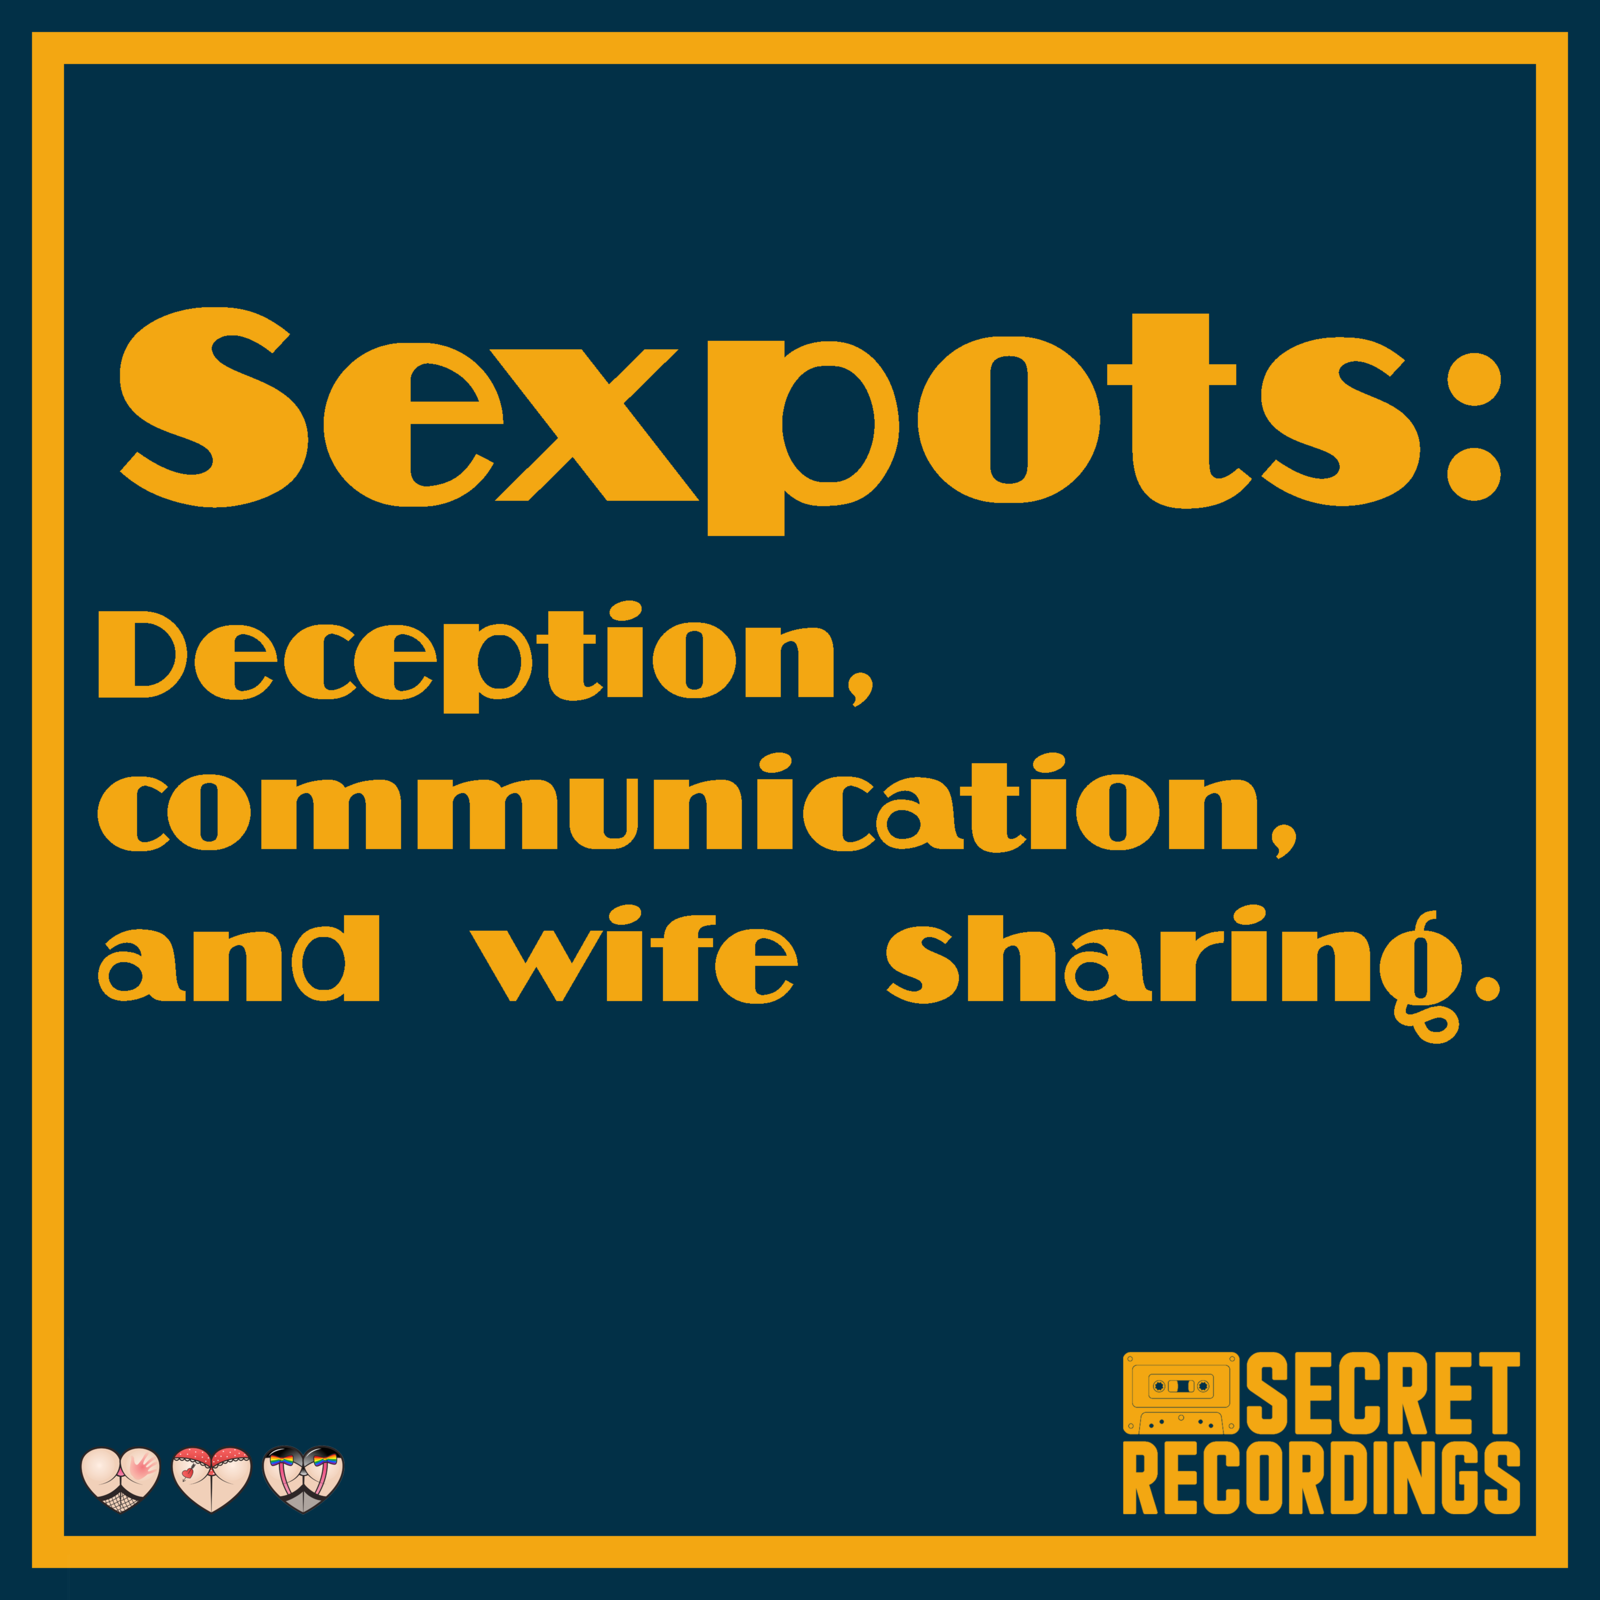 Sexpots / Deception, communication, and wife sharing. photo image pic